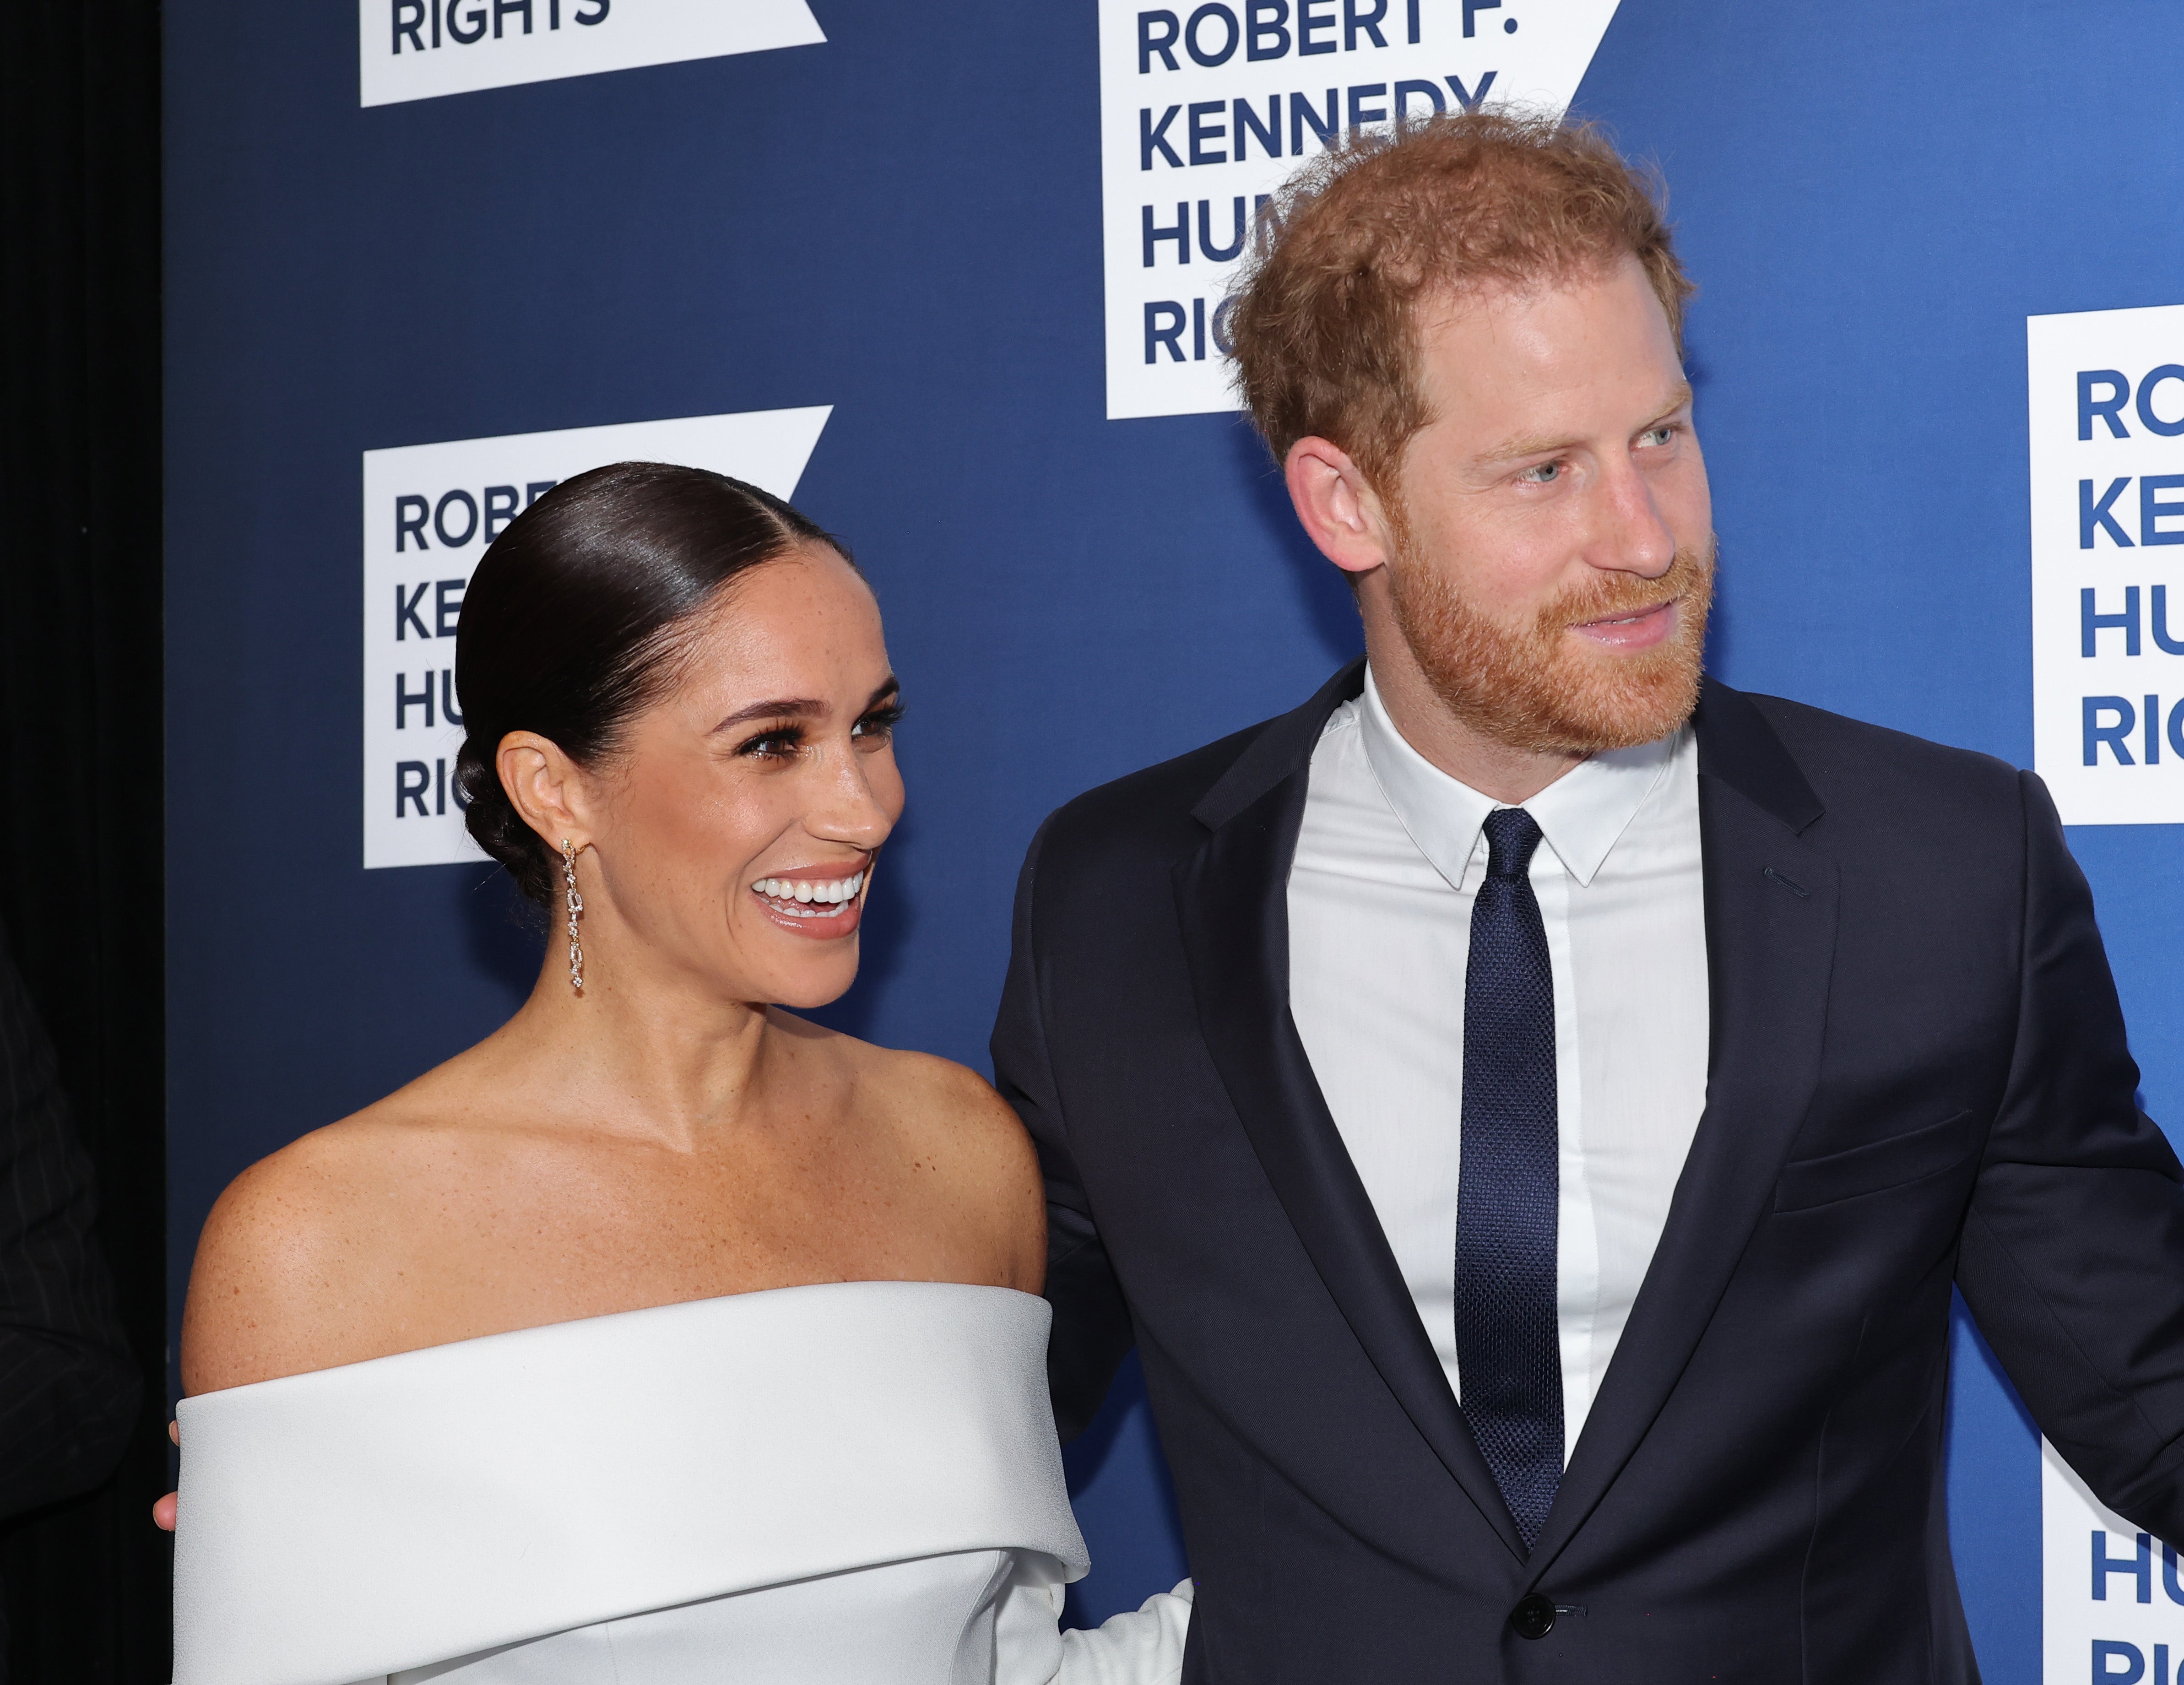 The Duke and Duchess moved to the US in 2020